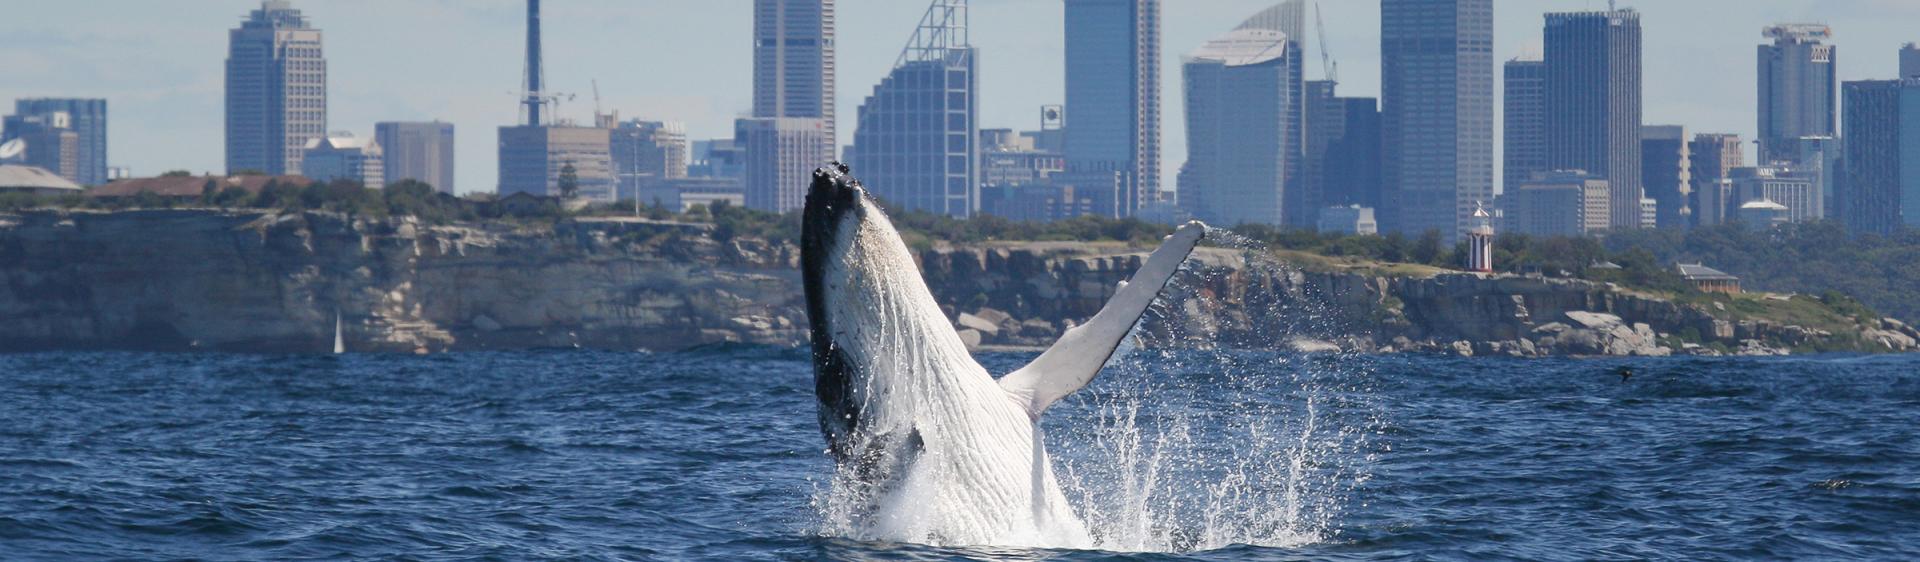 Whale watching, Sydney